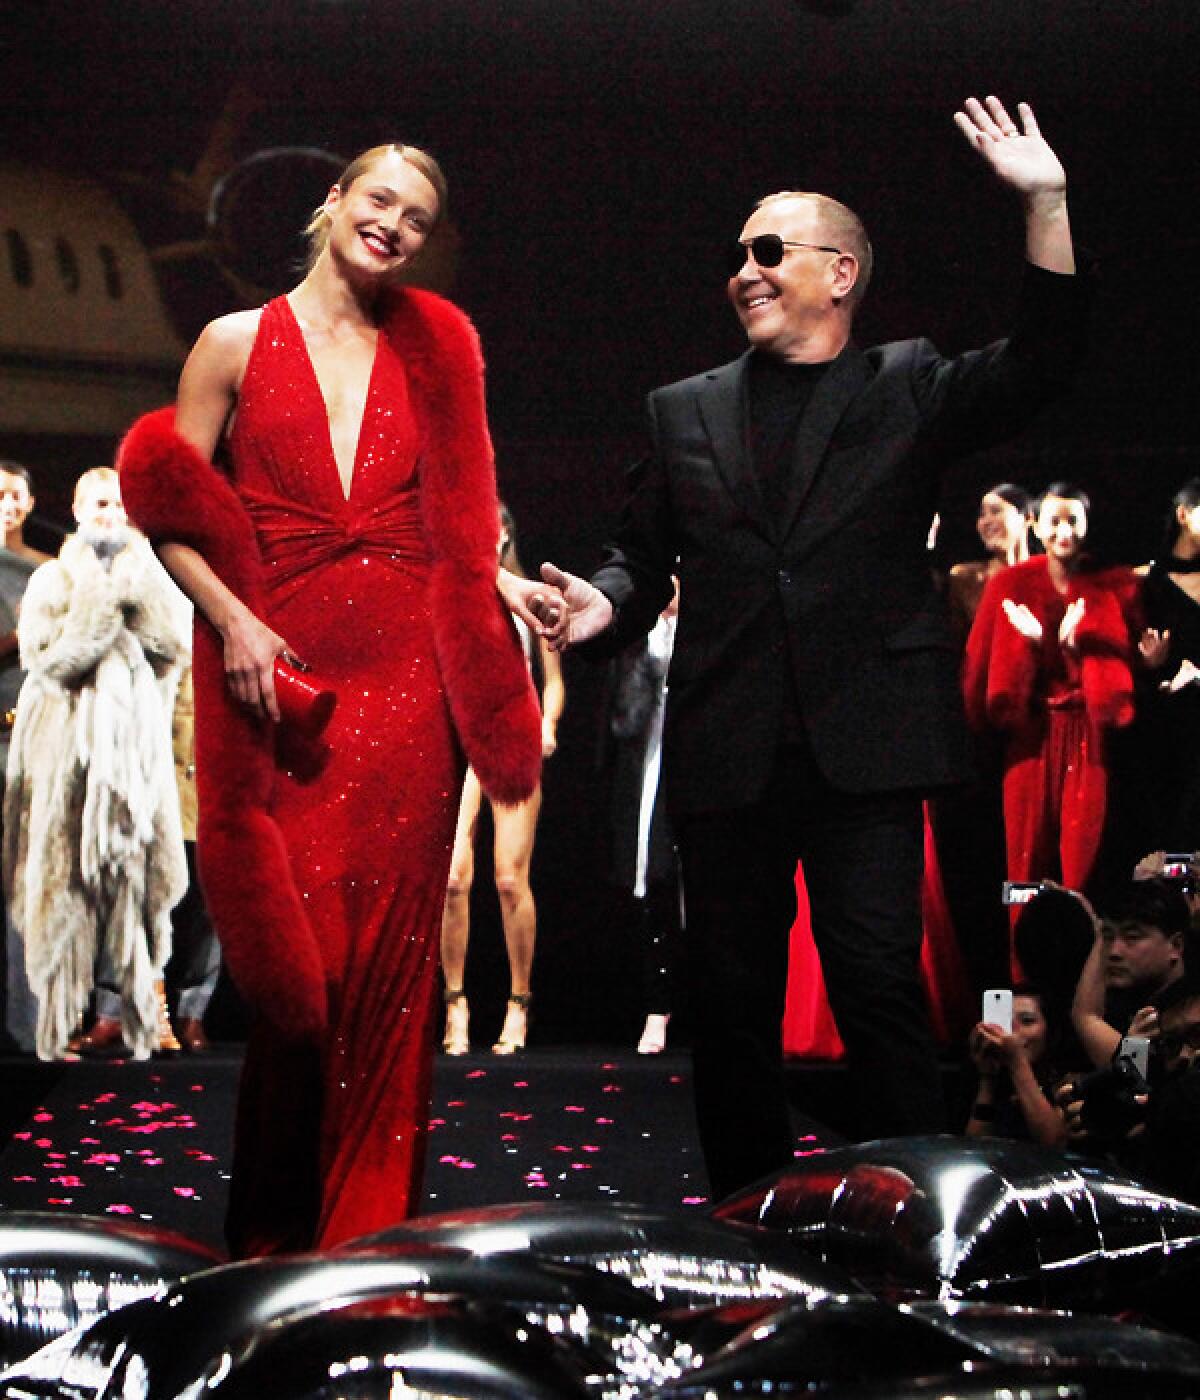 Michael Kors with Karmen Pedaru waves to guest after the fashion show for a picture after The Michael Kors Jet Set Experience fashion show.